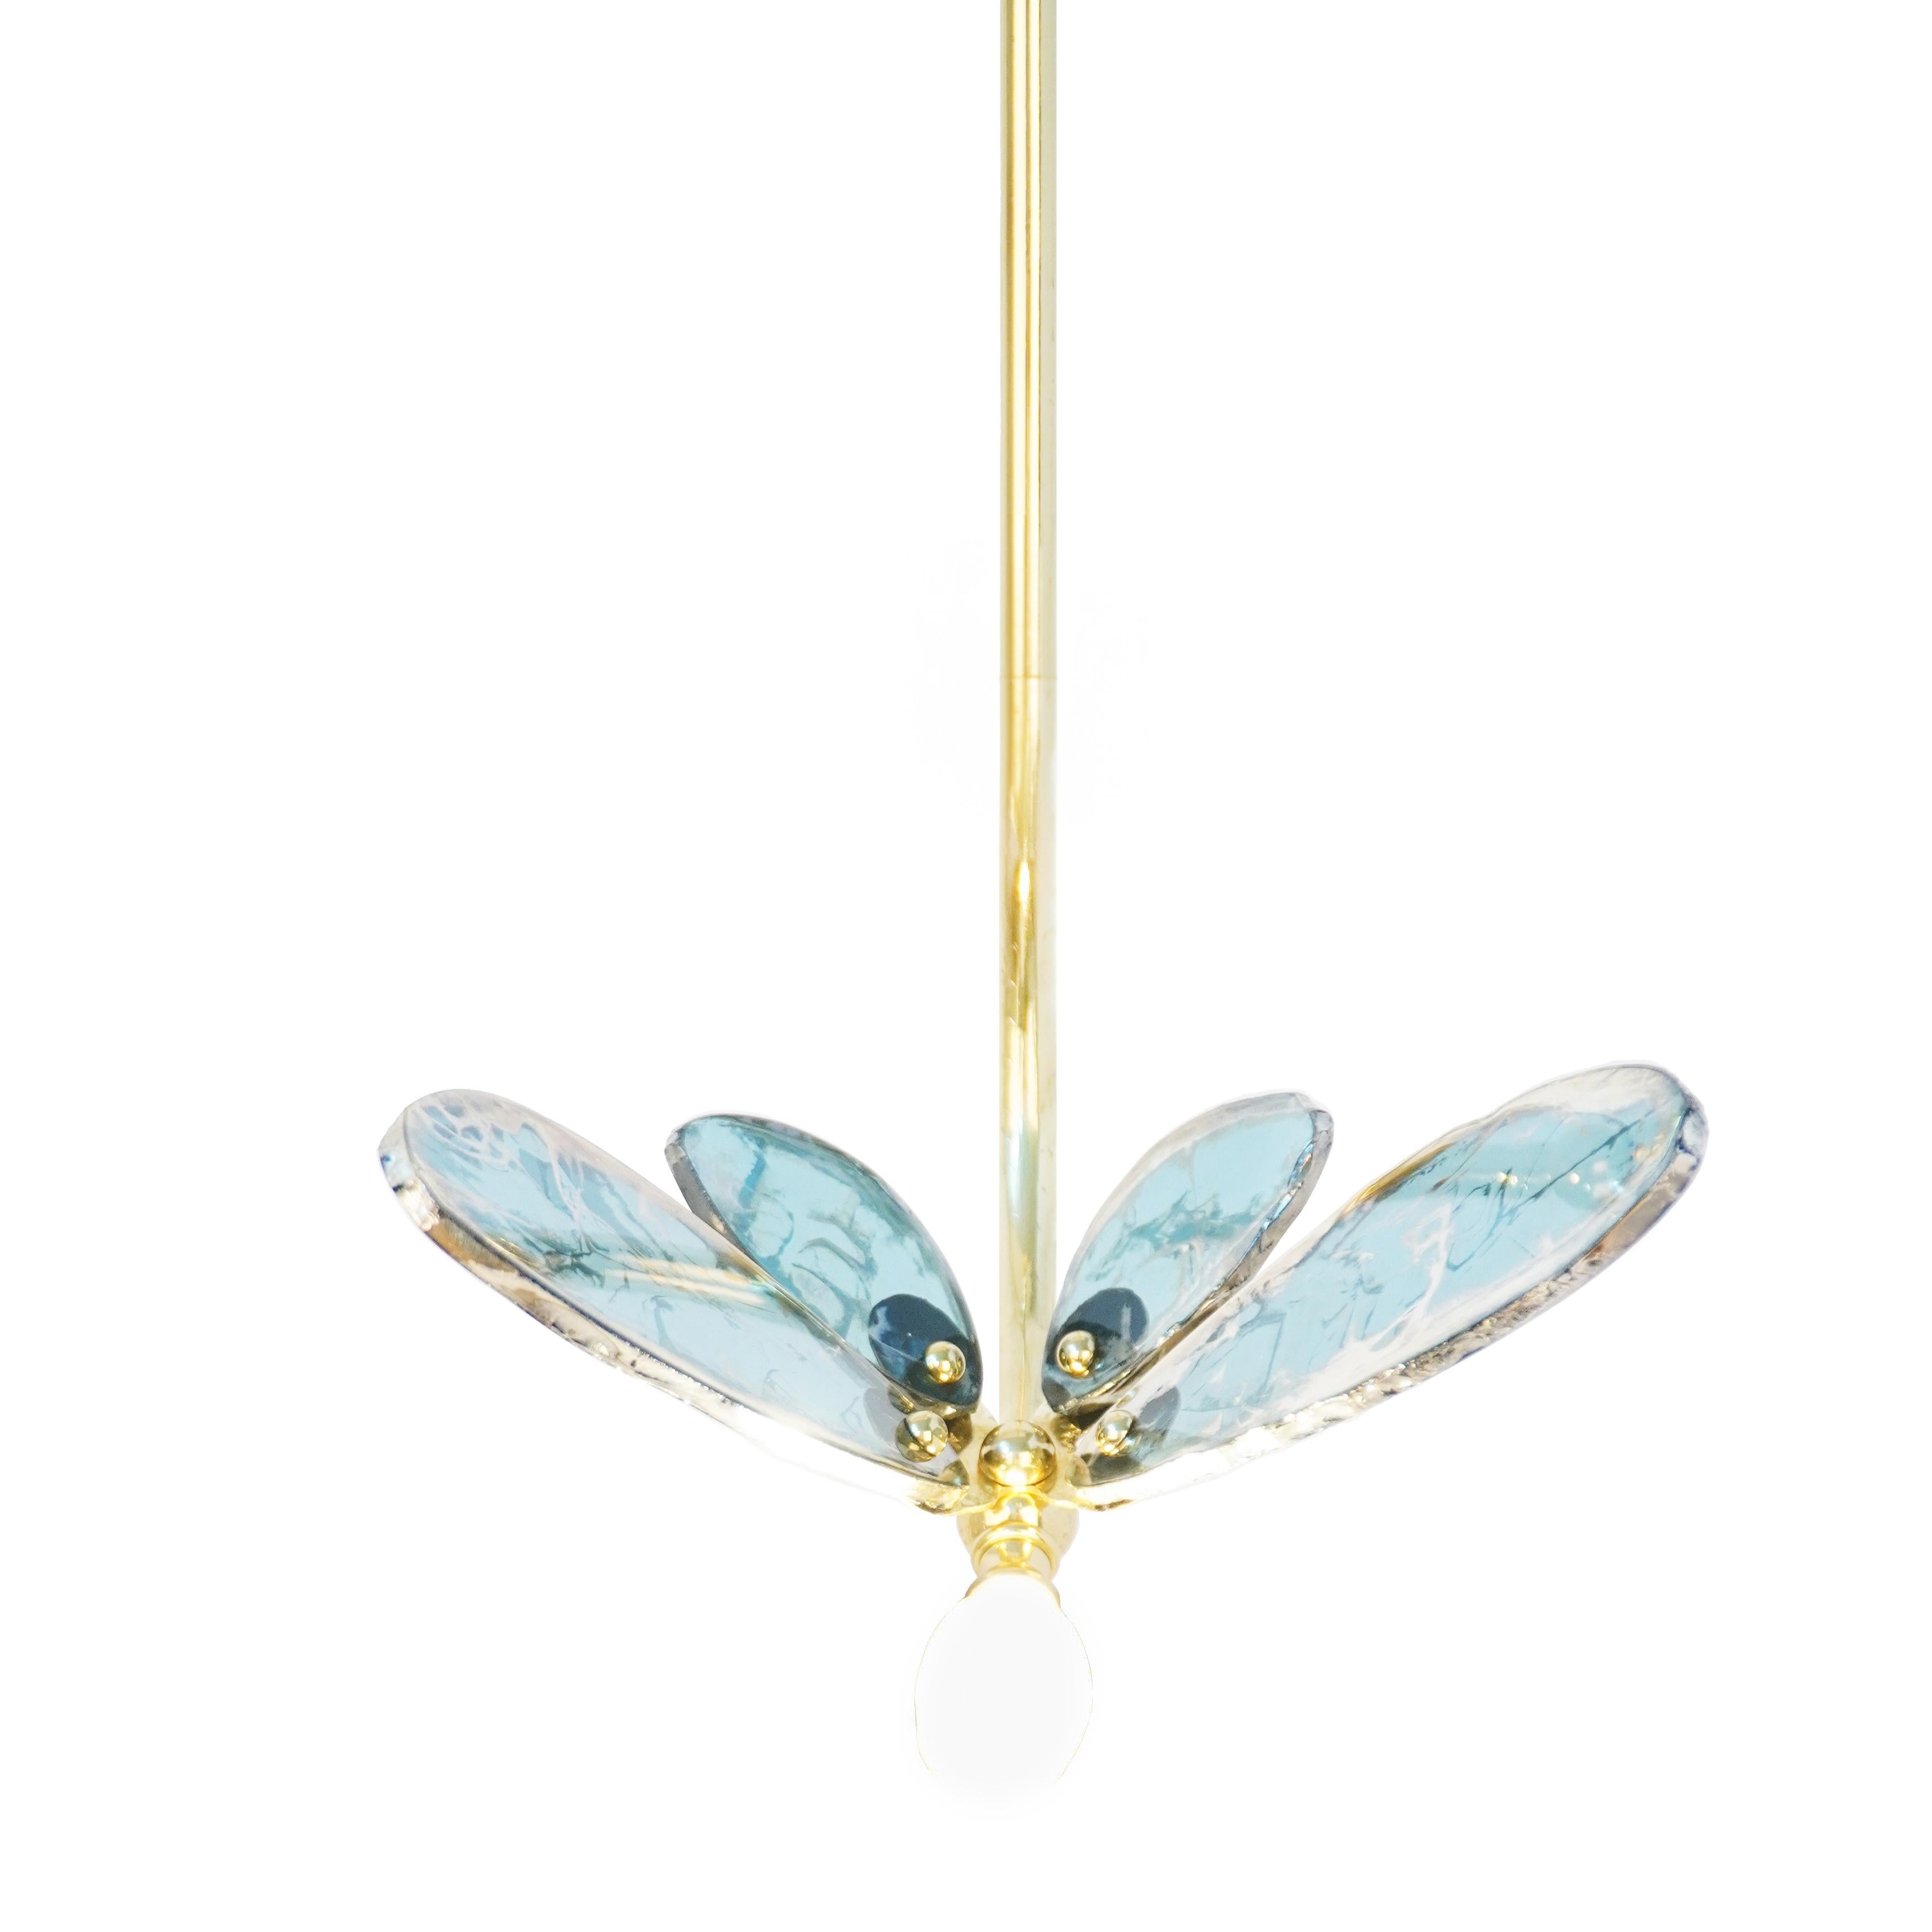 TRILLY The fairy fragrance of freedom

Small and sophisticated, the Trillies, enterely crafted in Italy, are the little sisters of our Butterfly models, they bring an ethereal allure to your home décor, thanks to their colored and silvered glass